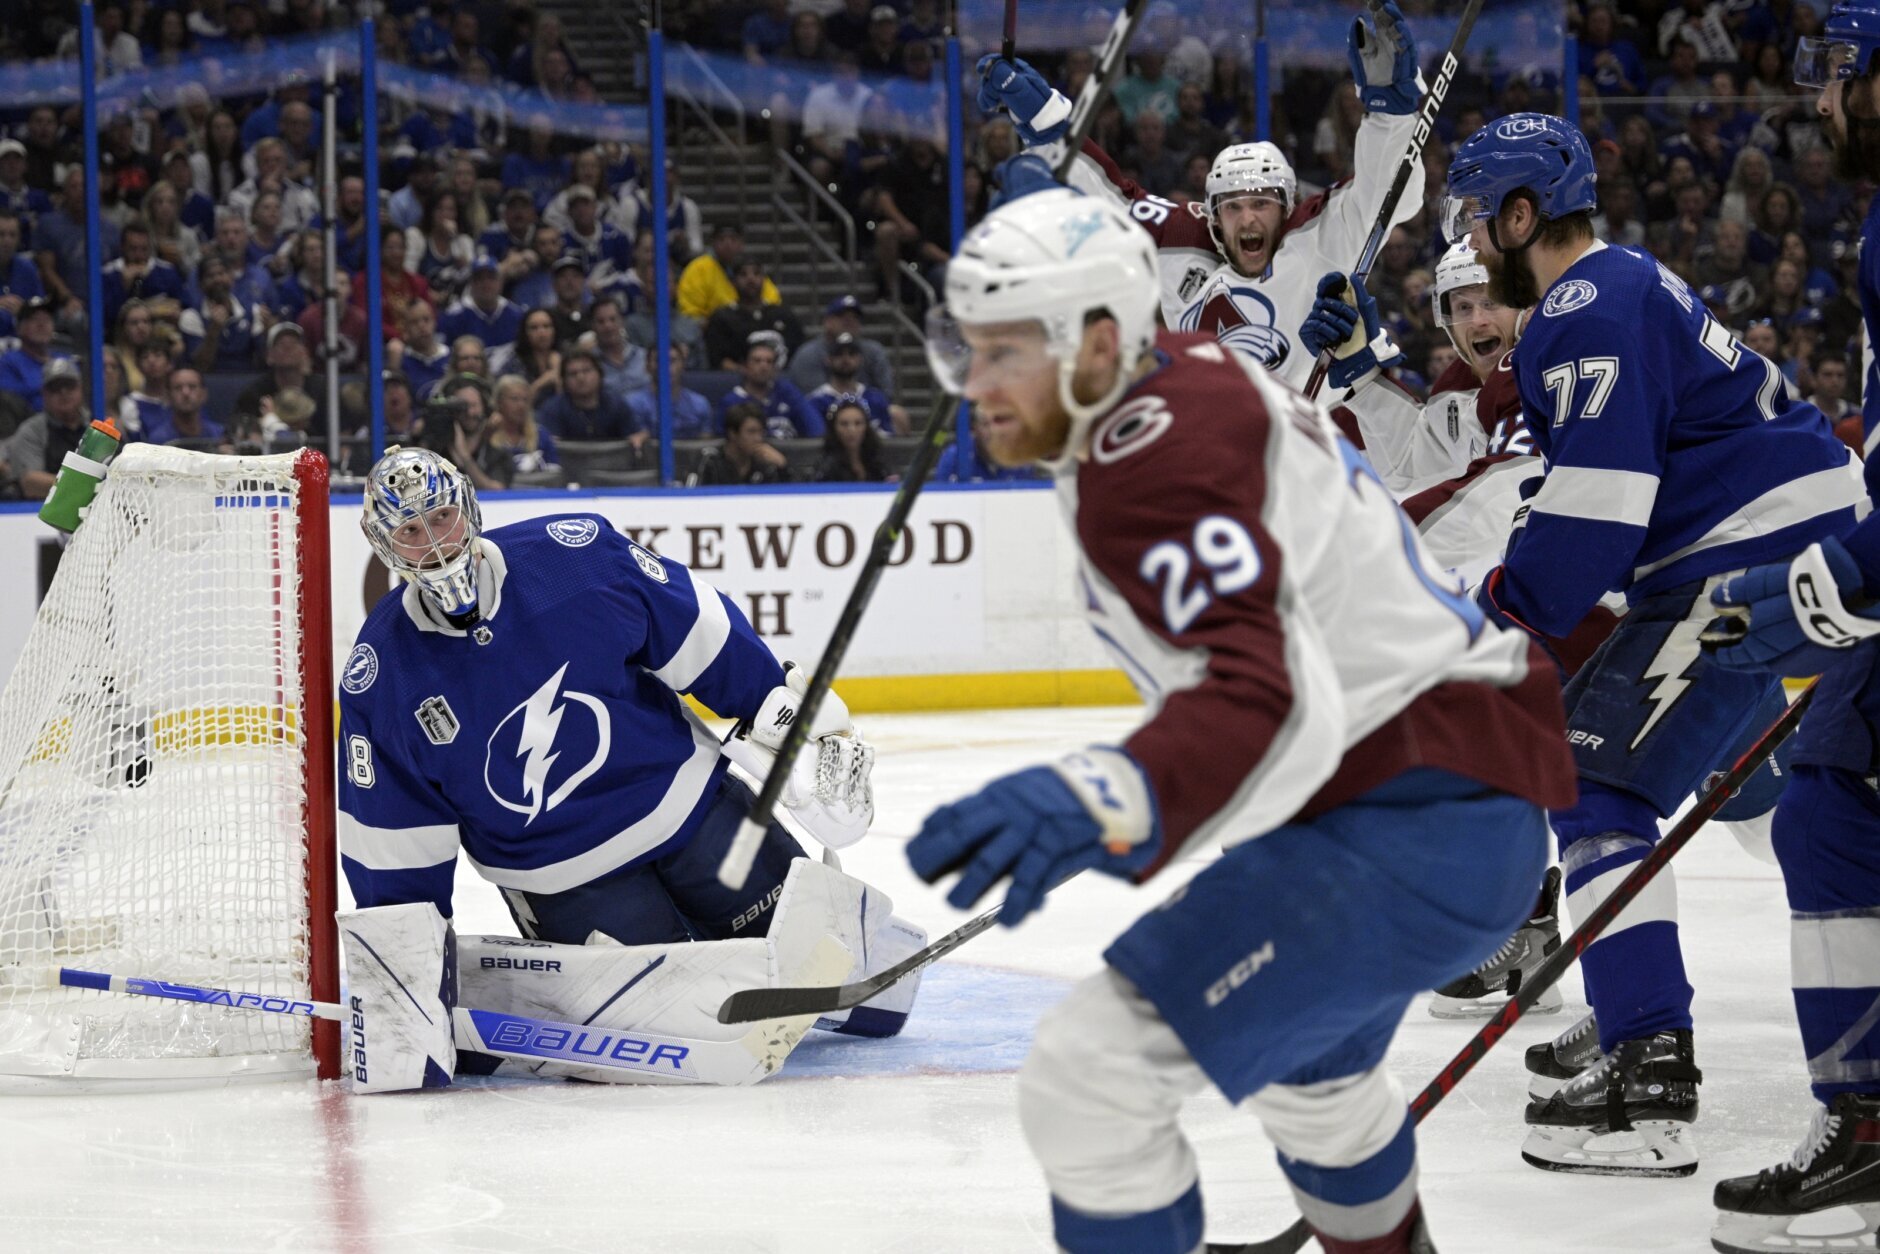 https://wtop.com/wp-content/uploads/2022/06/Stanley_Cup_Avalanche_Lightning_Hockey_27407-1880x1254.jpg